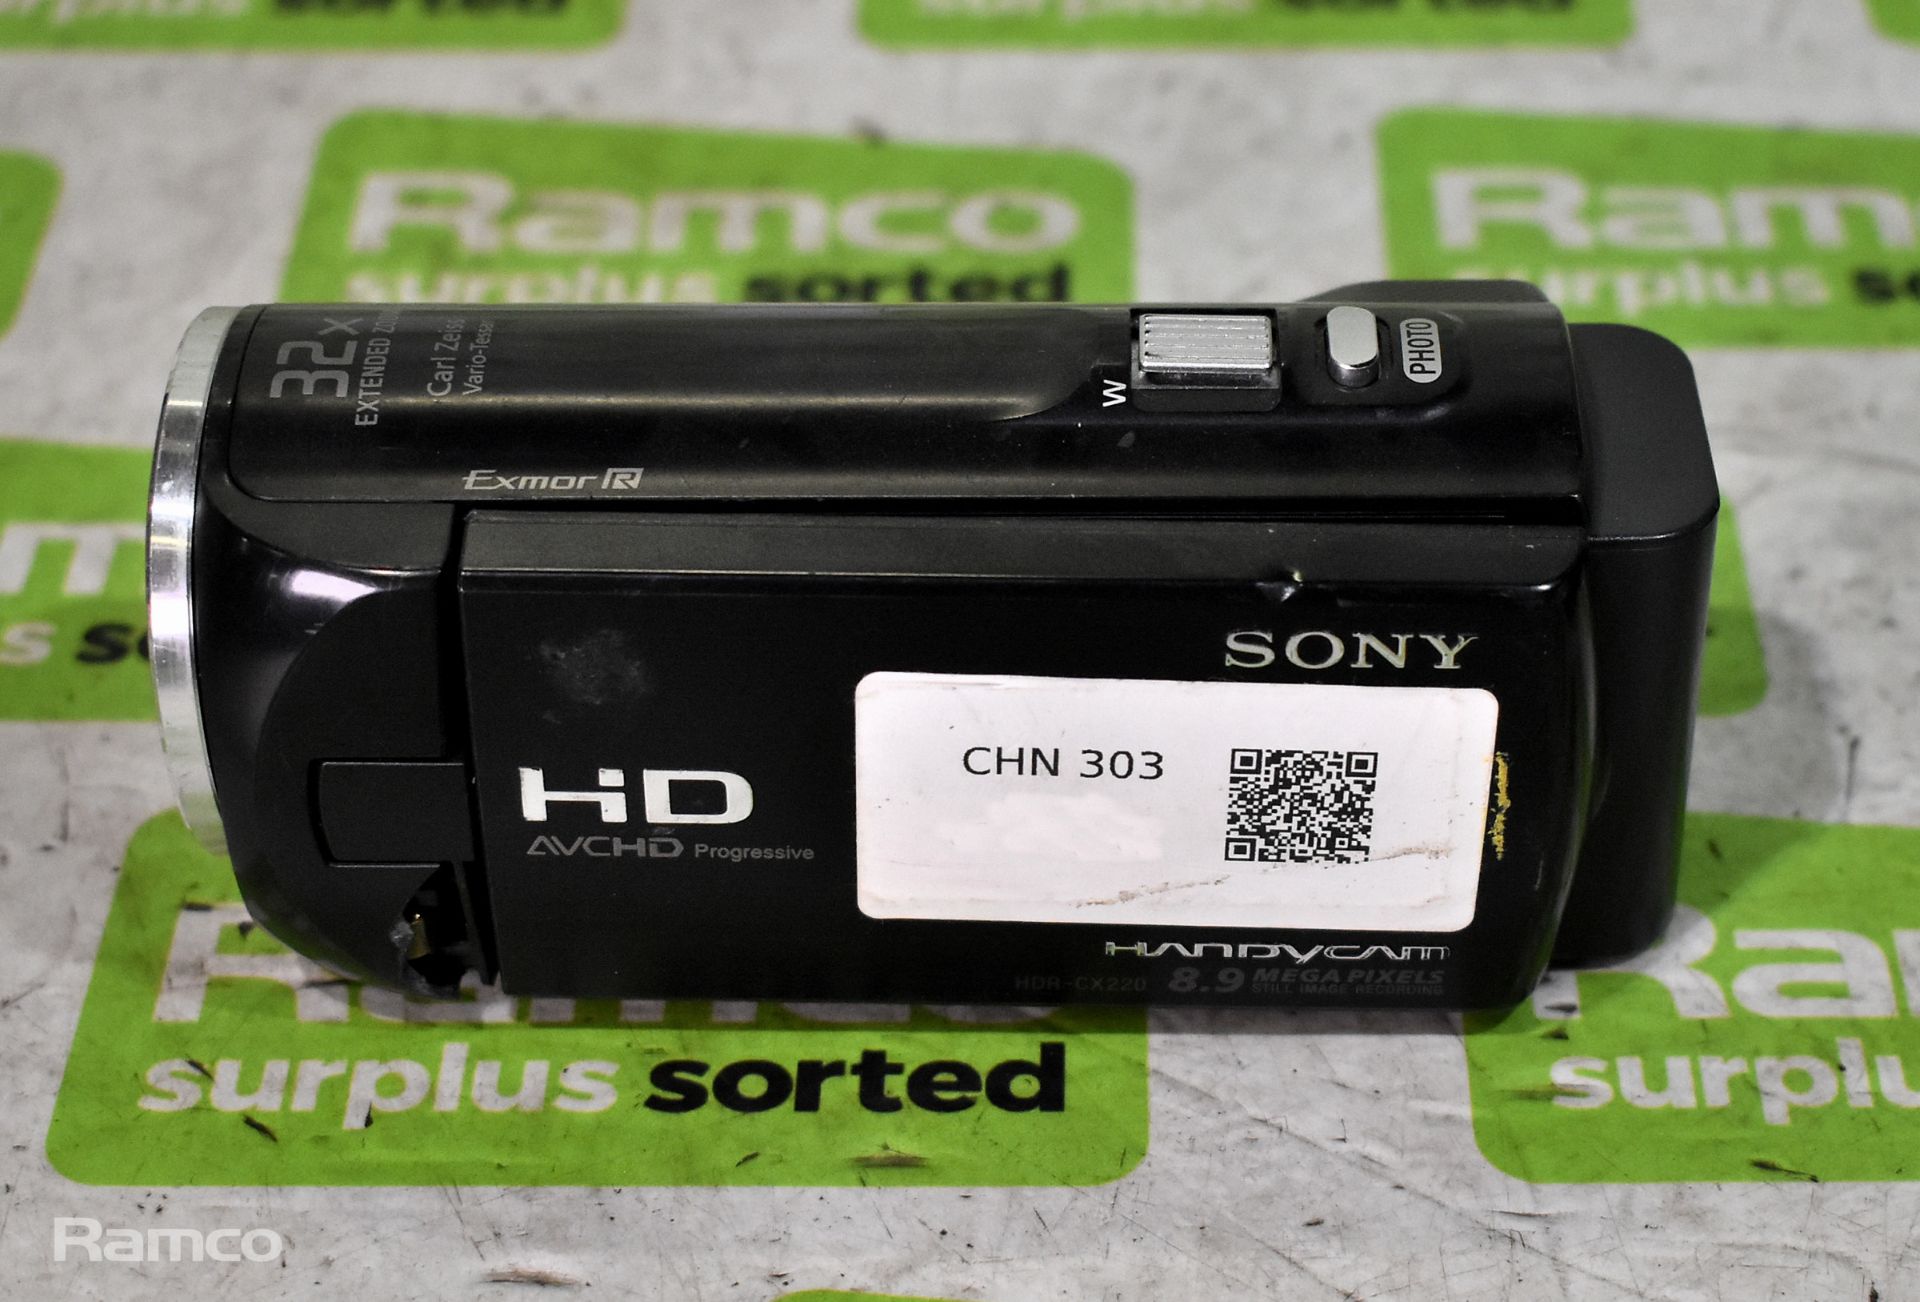 2x Sony camcorders HDR-CX220E, 1x Sony camcorder HDR-CX280E - Image 4 of 13